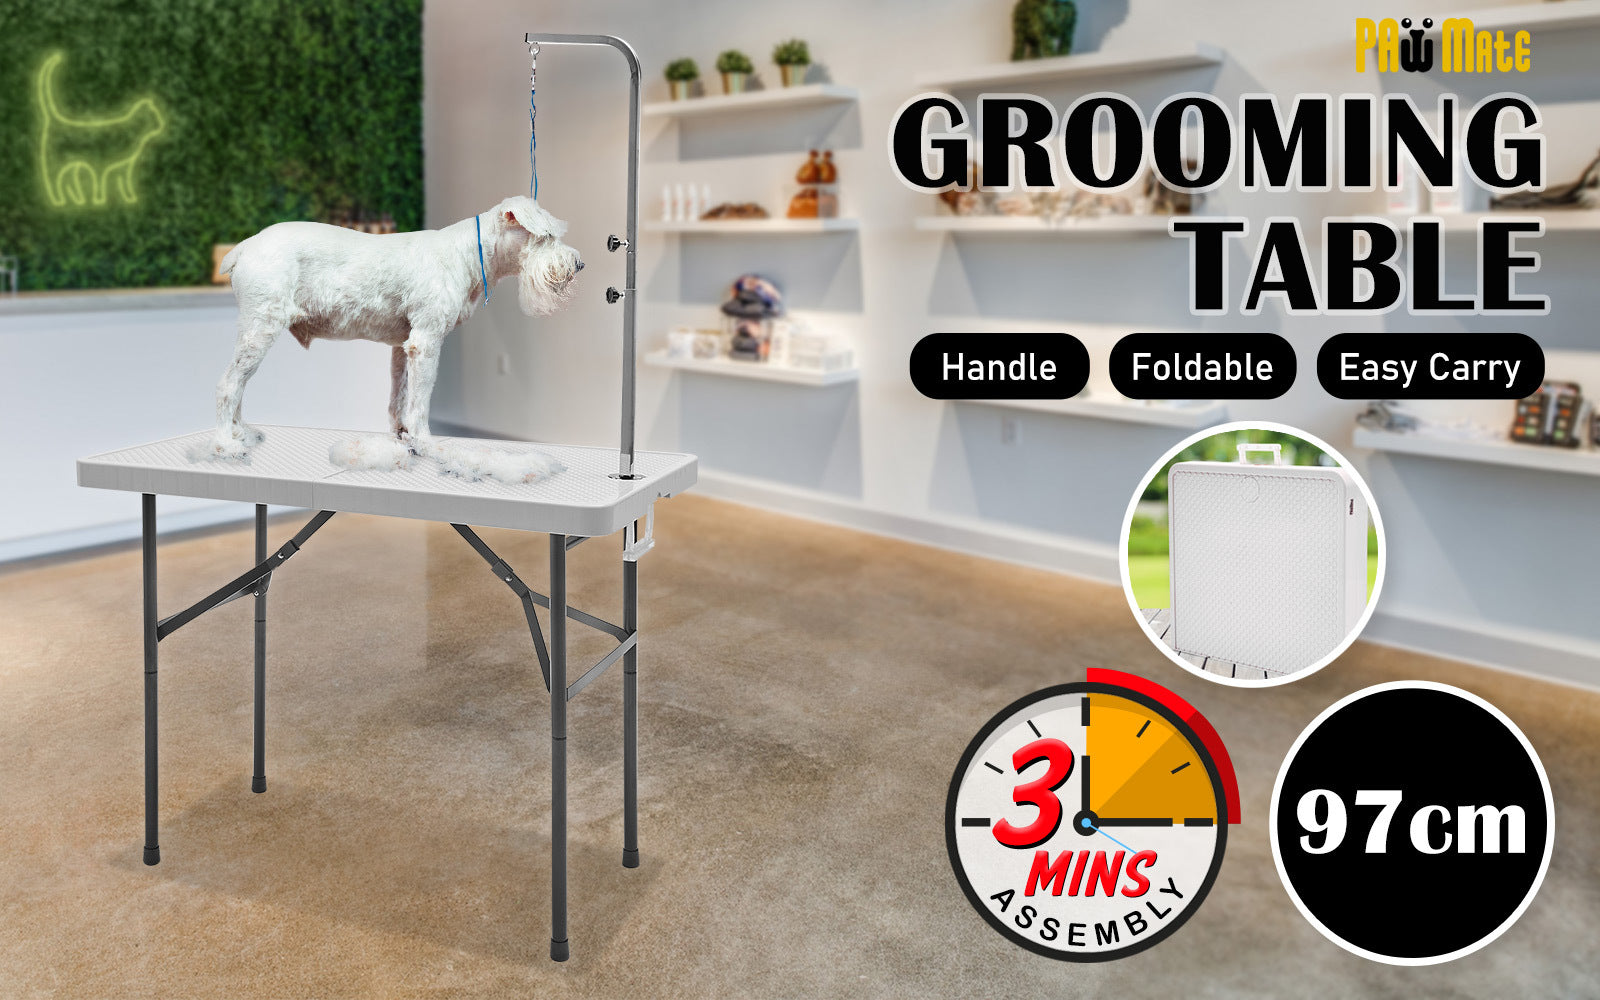 Paw Mat 97cm White Dog Cat Pet Grooming Salon Table Foldable Carry Height Adjustable - image2